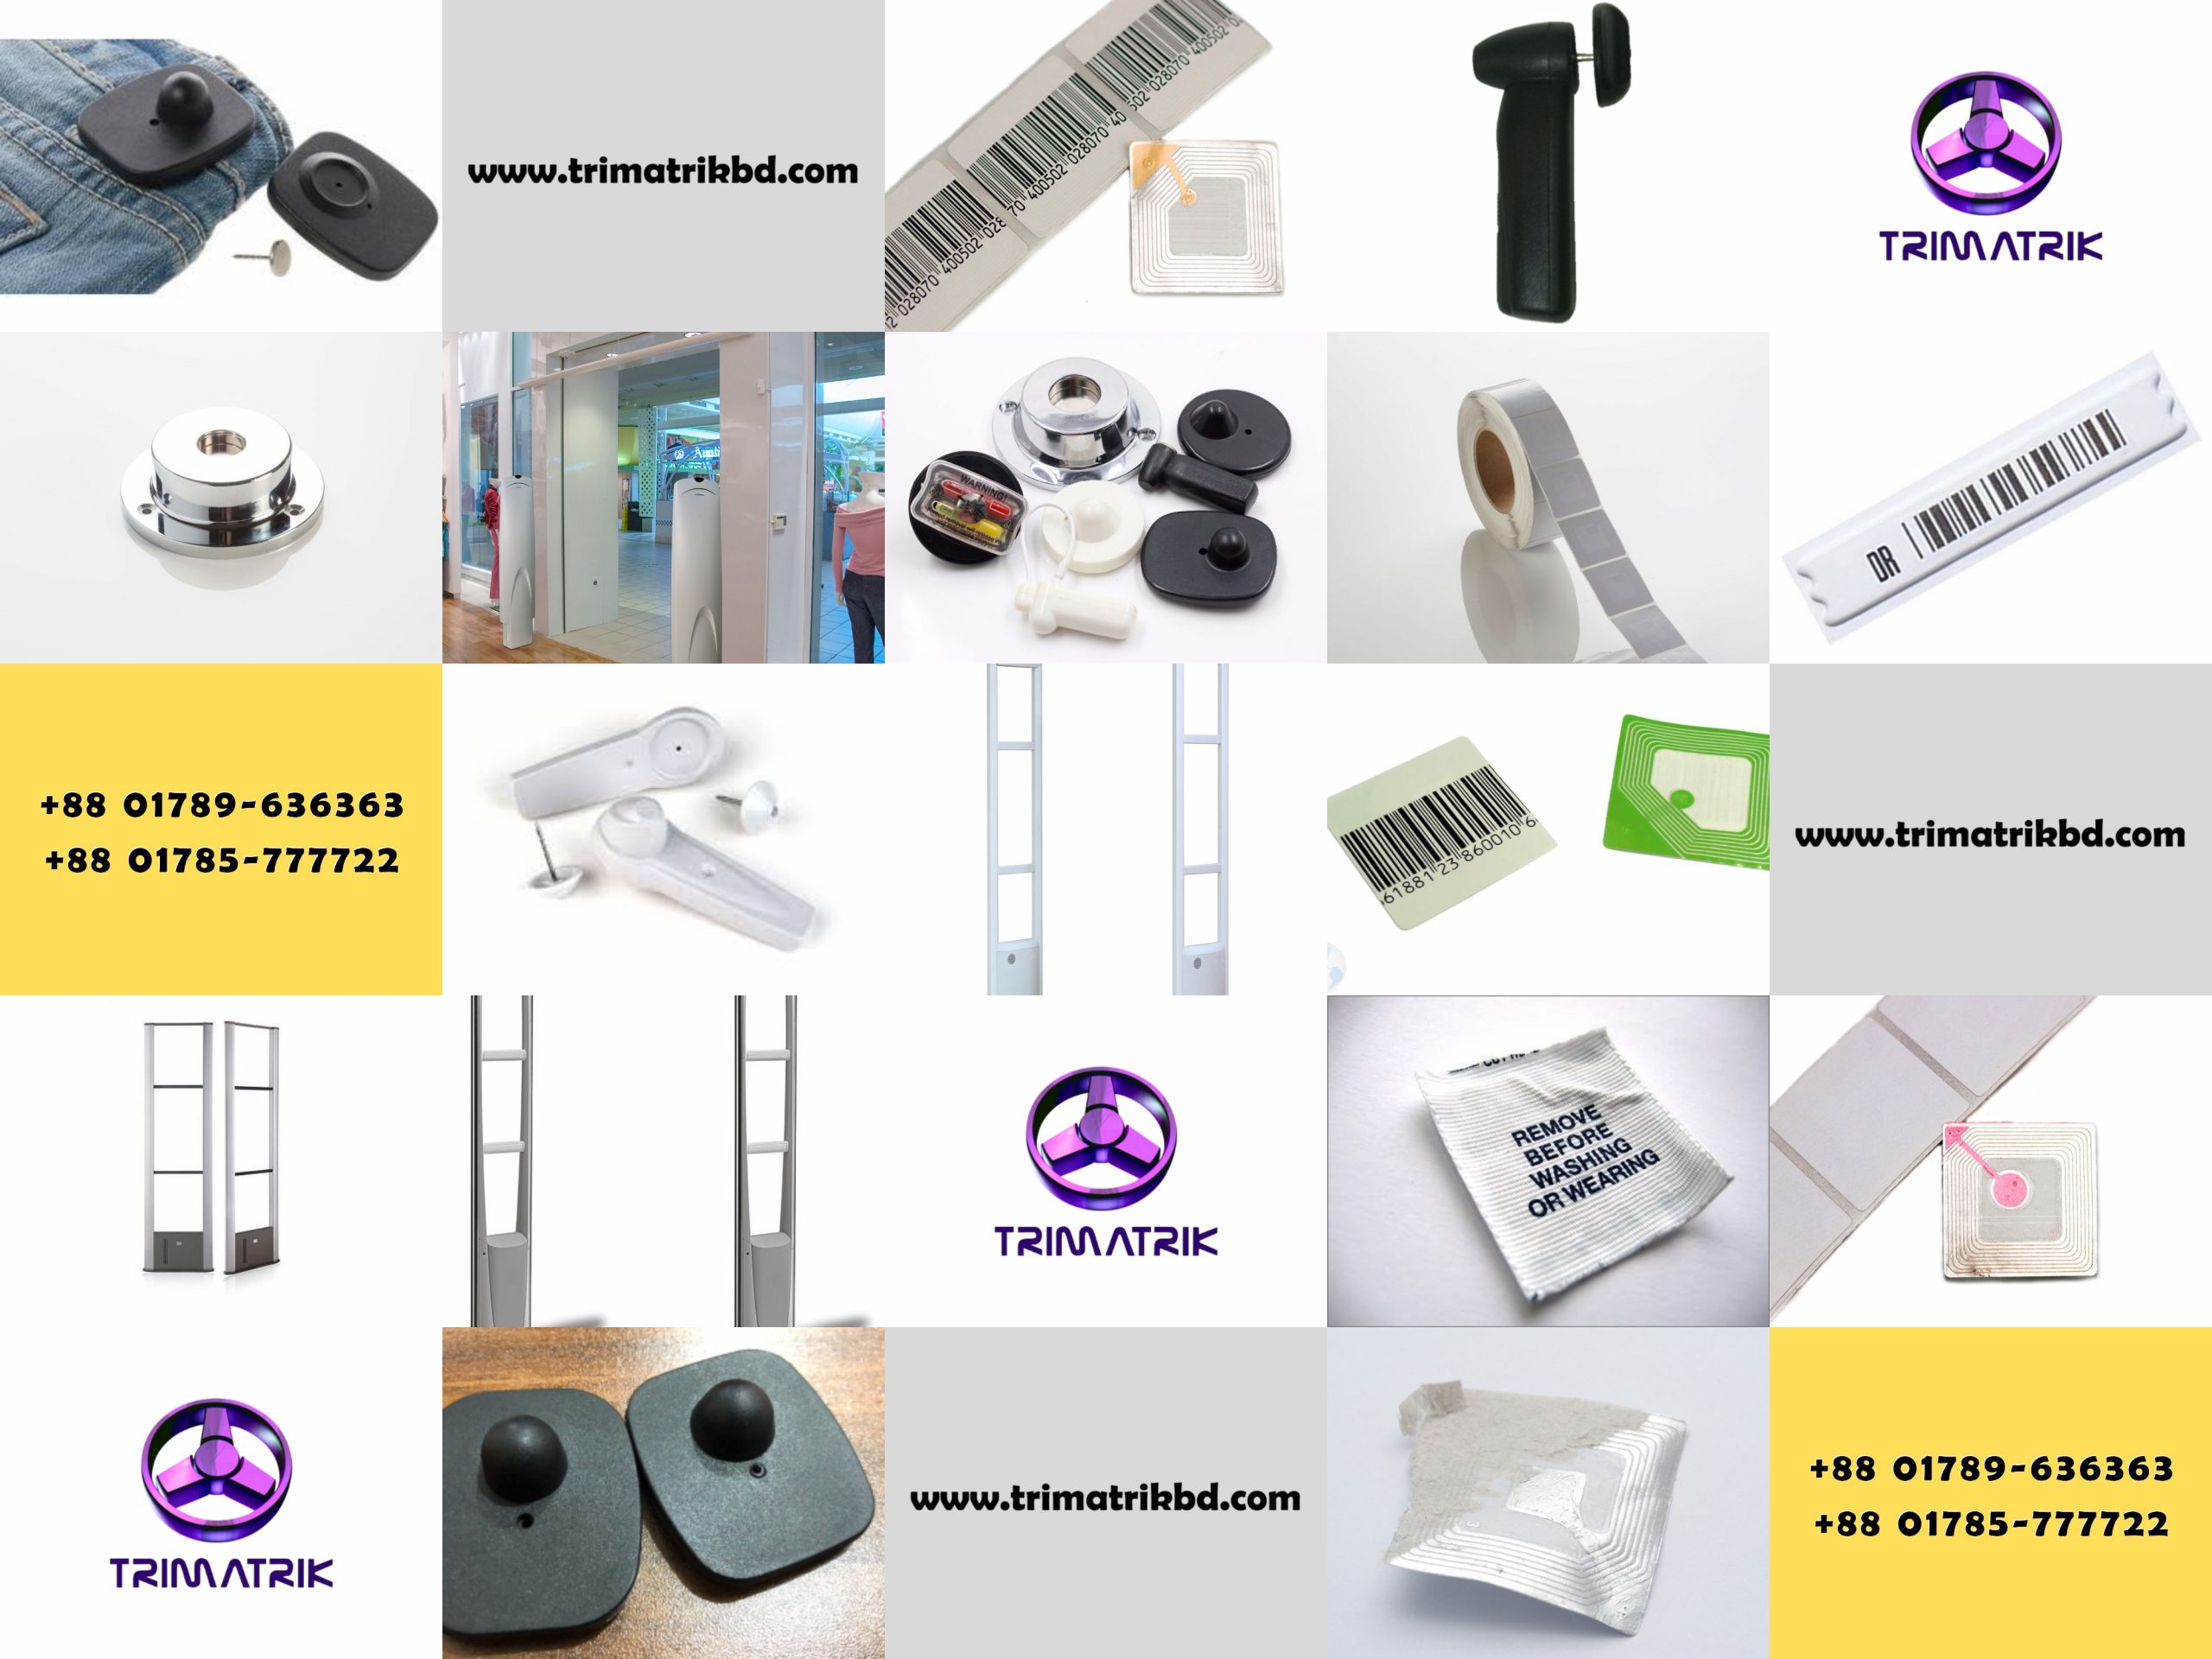 EAS Anti-theft Alarm Security system in Bangladesh, EAS system Price in Bangladesh